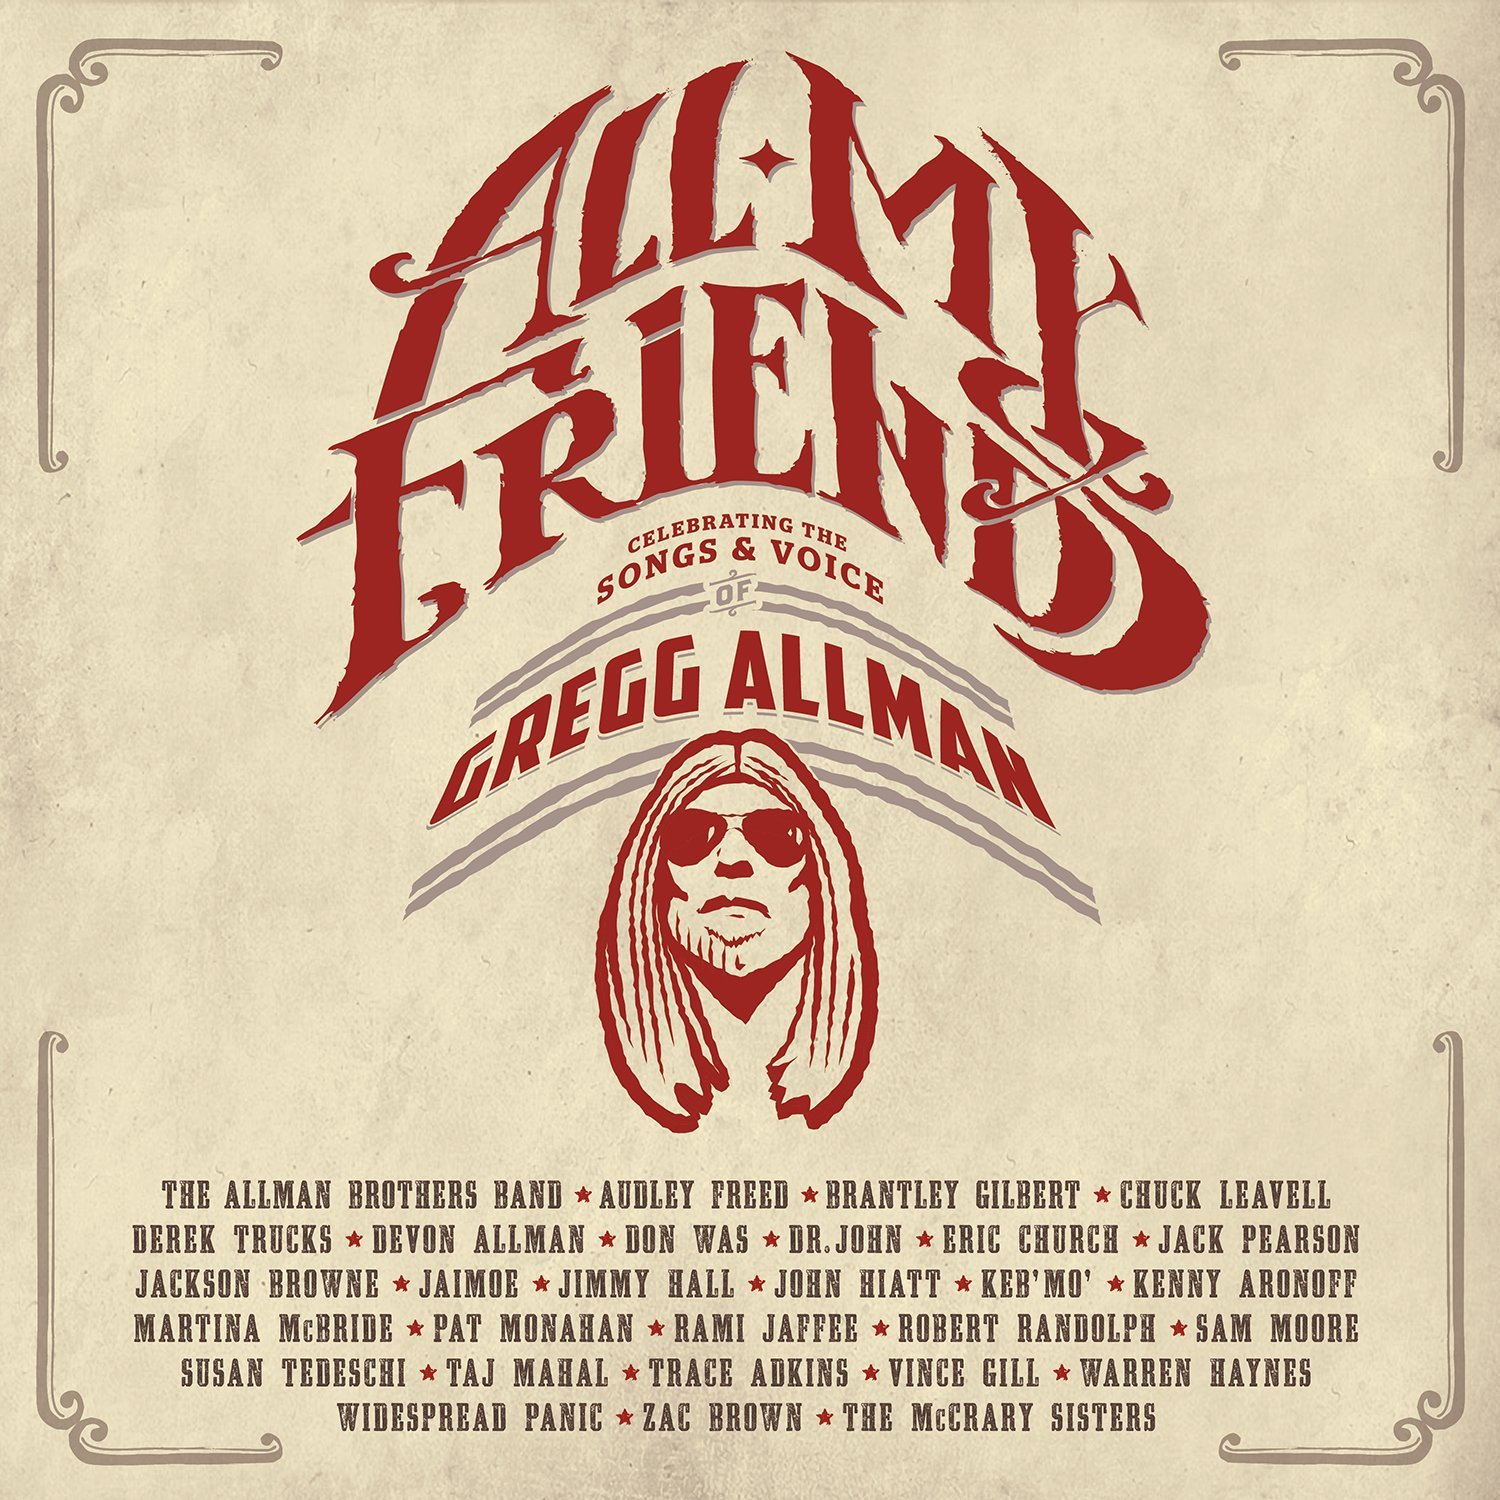 All My Friends: Celebrating The Songs & Voice Of Gregg Allman [2 CD/DVD Combo] on MovieShack